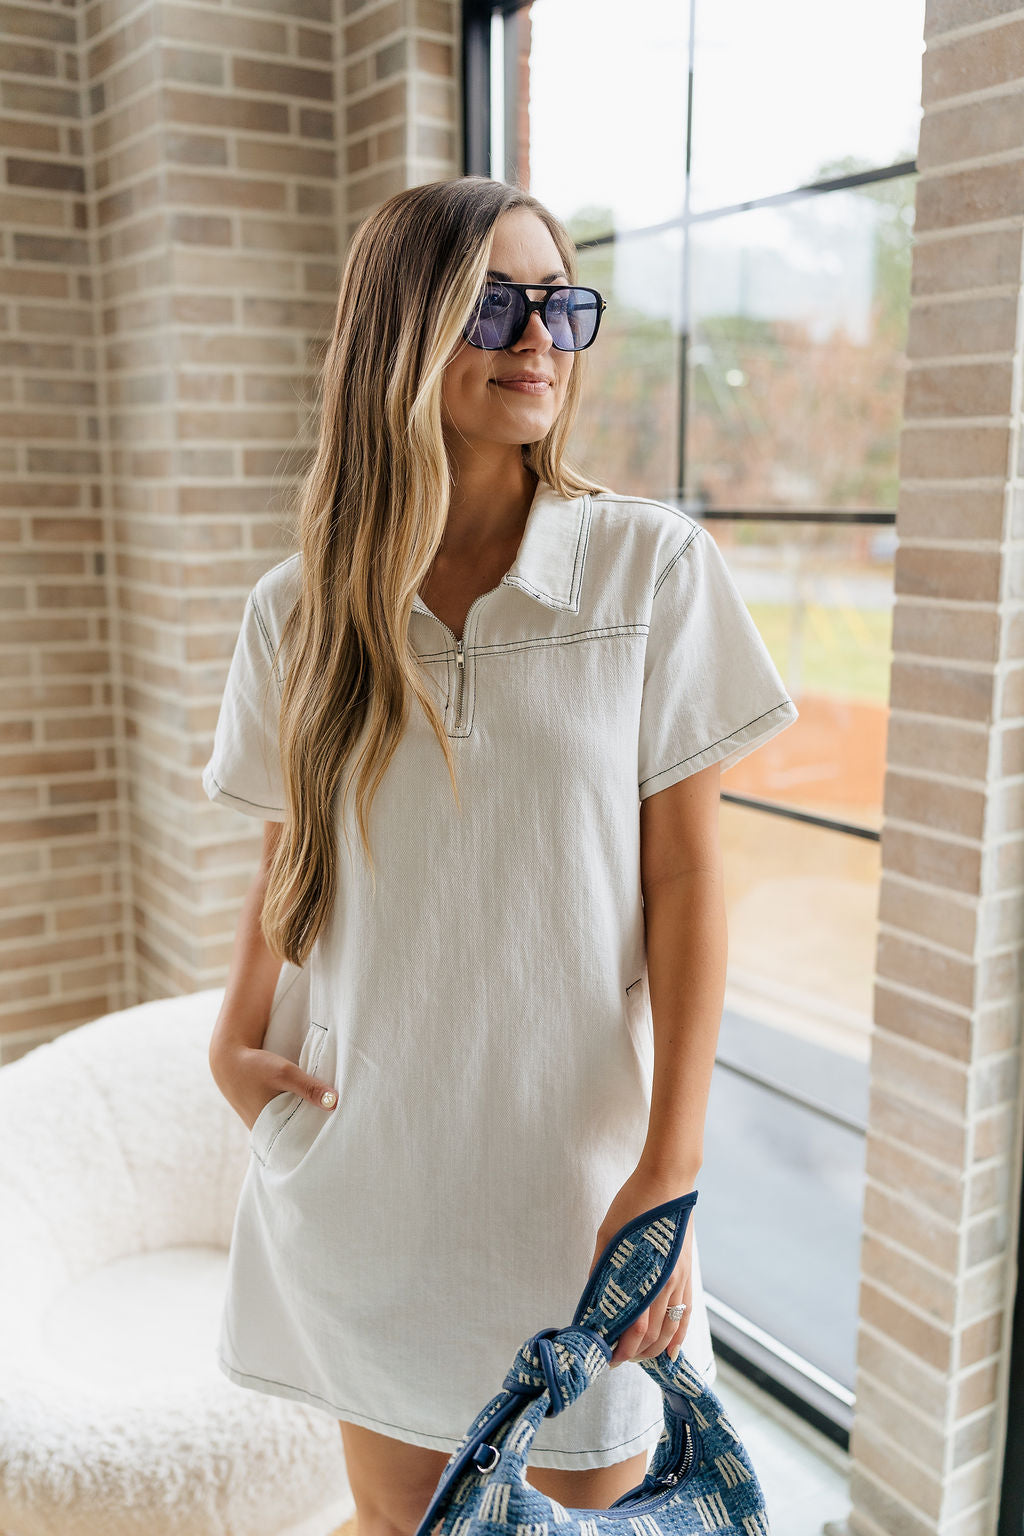 Front view of female model wearing the Chloe White Denim Short Sleeve Mini Dress which features White Denim Fabric, Black Stitch Details, Quarter Zip-Up with Collar Neckline, Front Pockets and Short Sleeves.